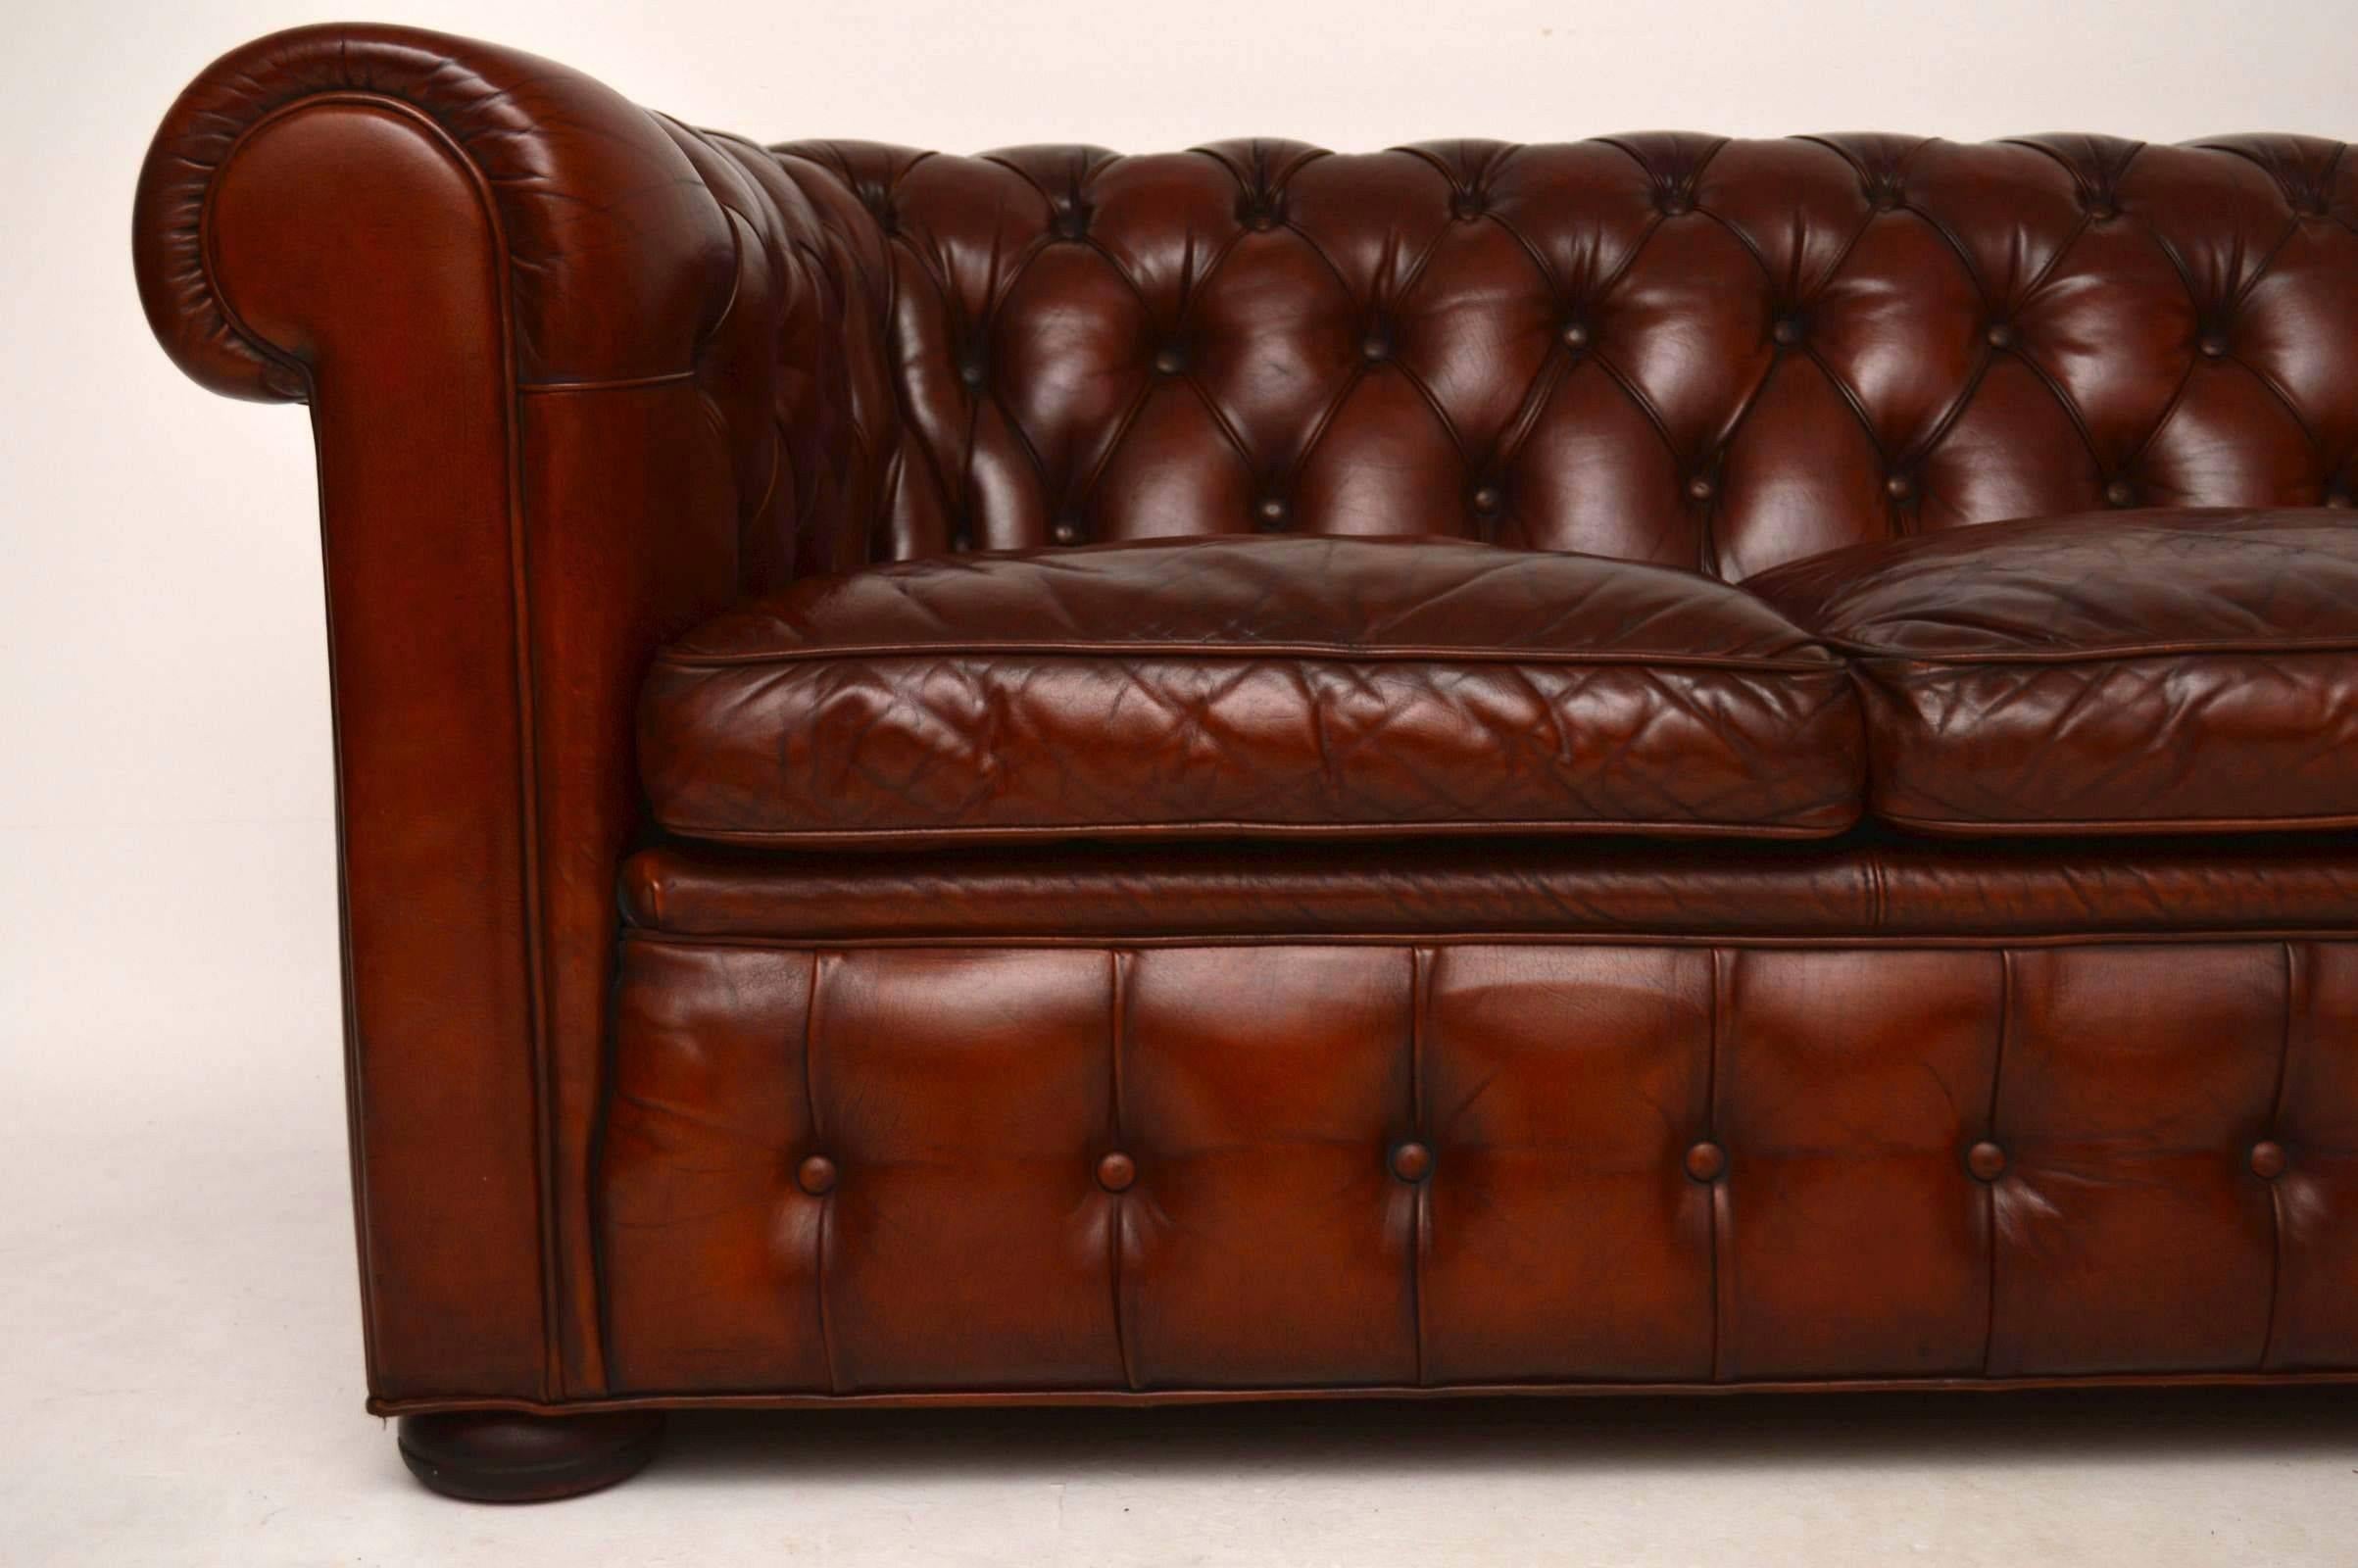 English Antique Leather Three-Seat Chesterfield Sofa